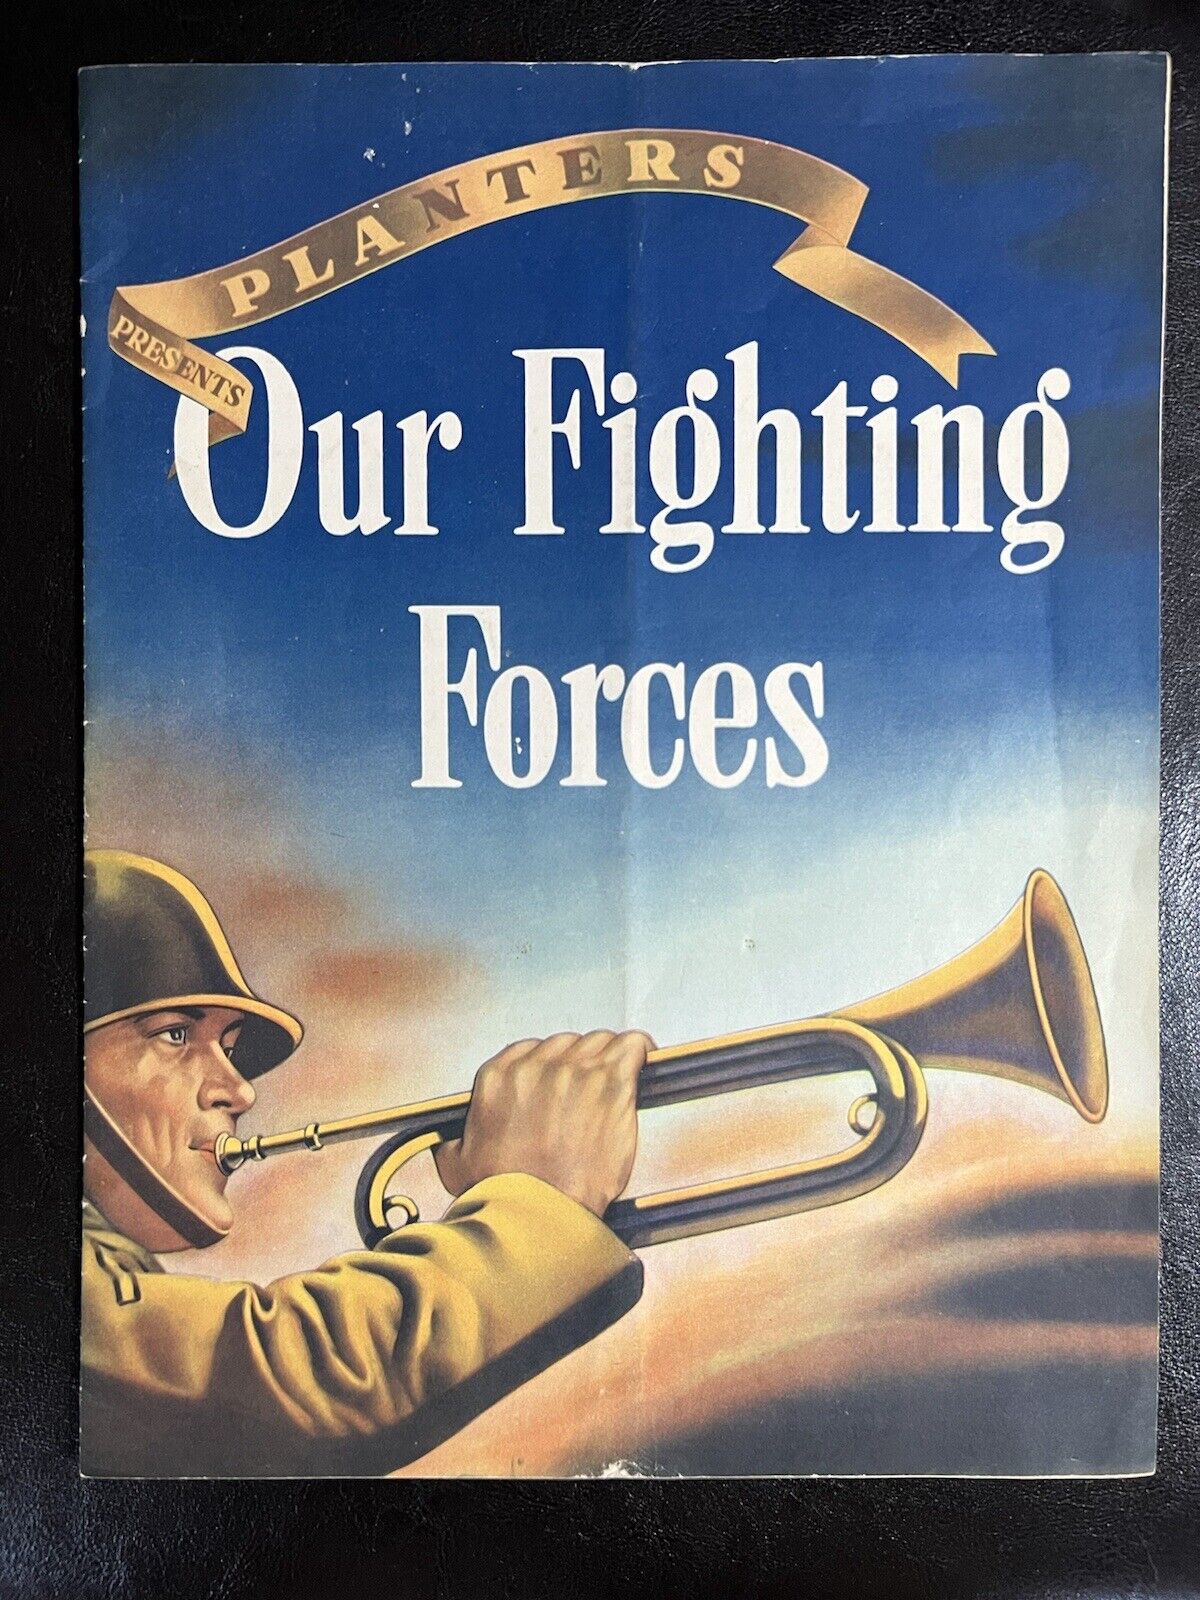 WWII Planters Peanuts “Our Fighting Forces” Book